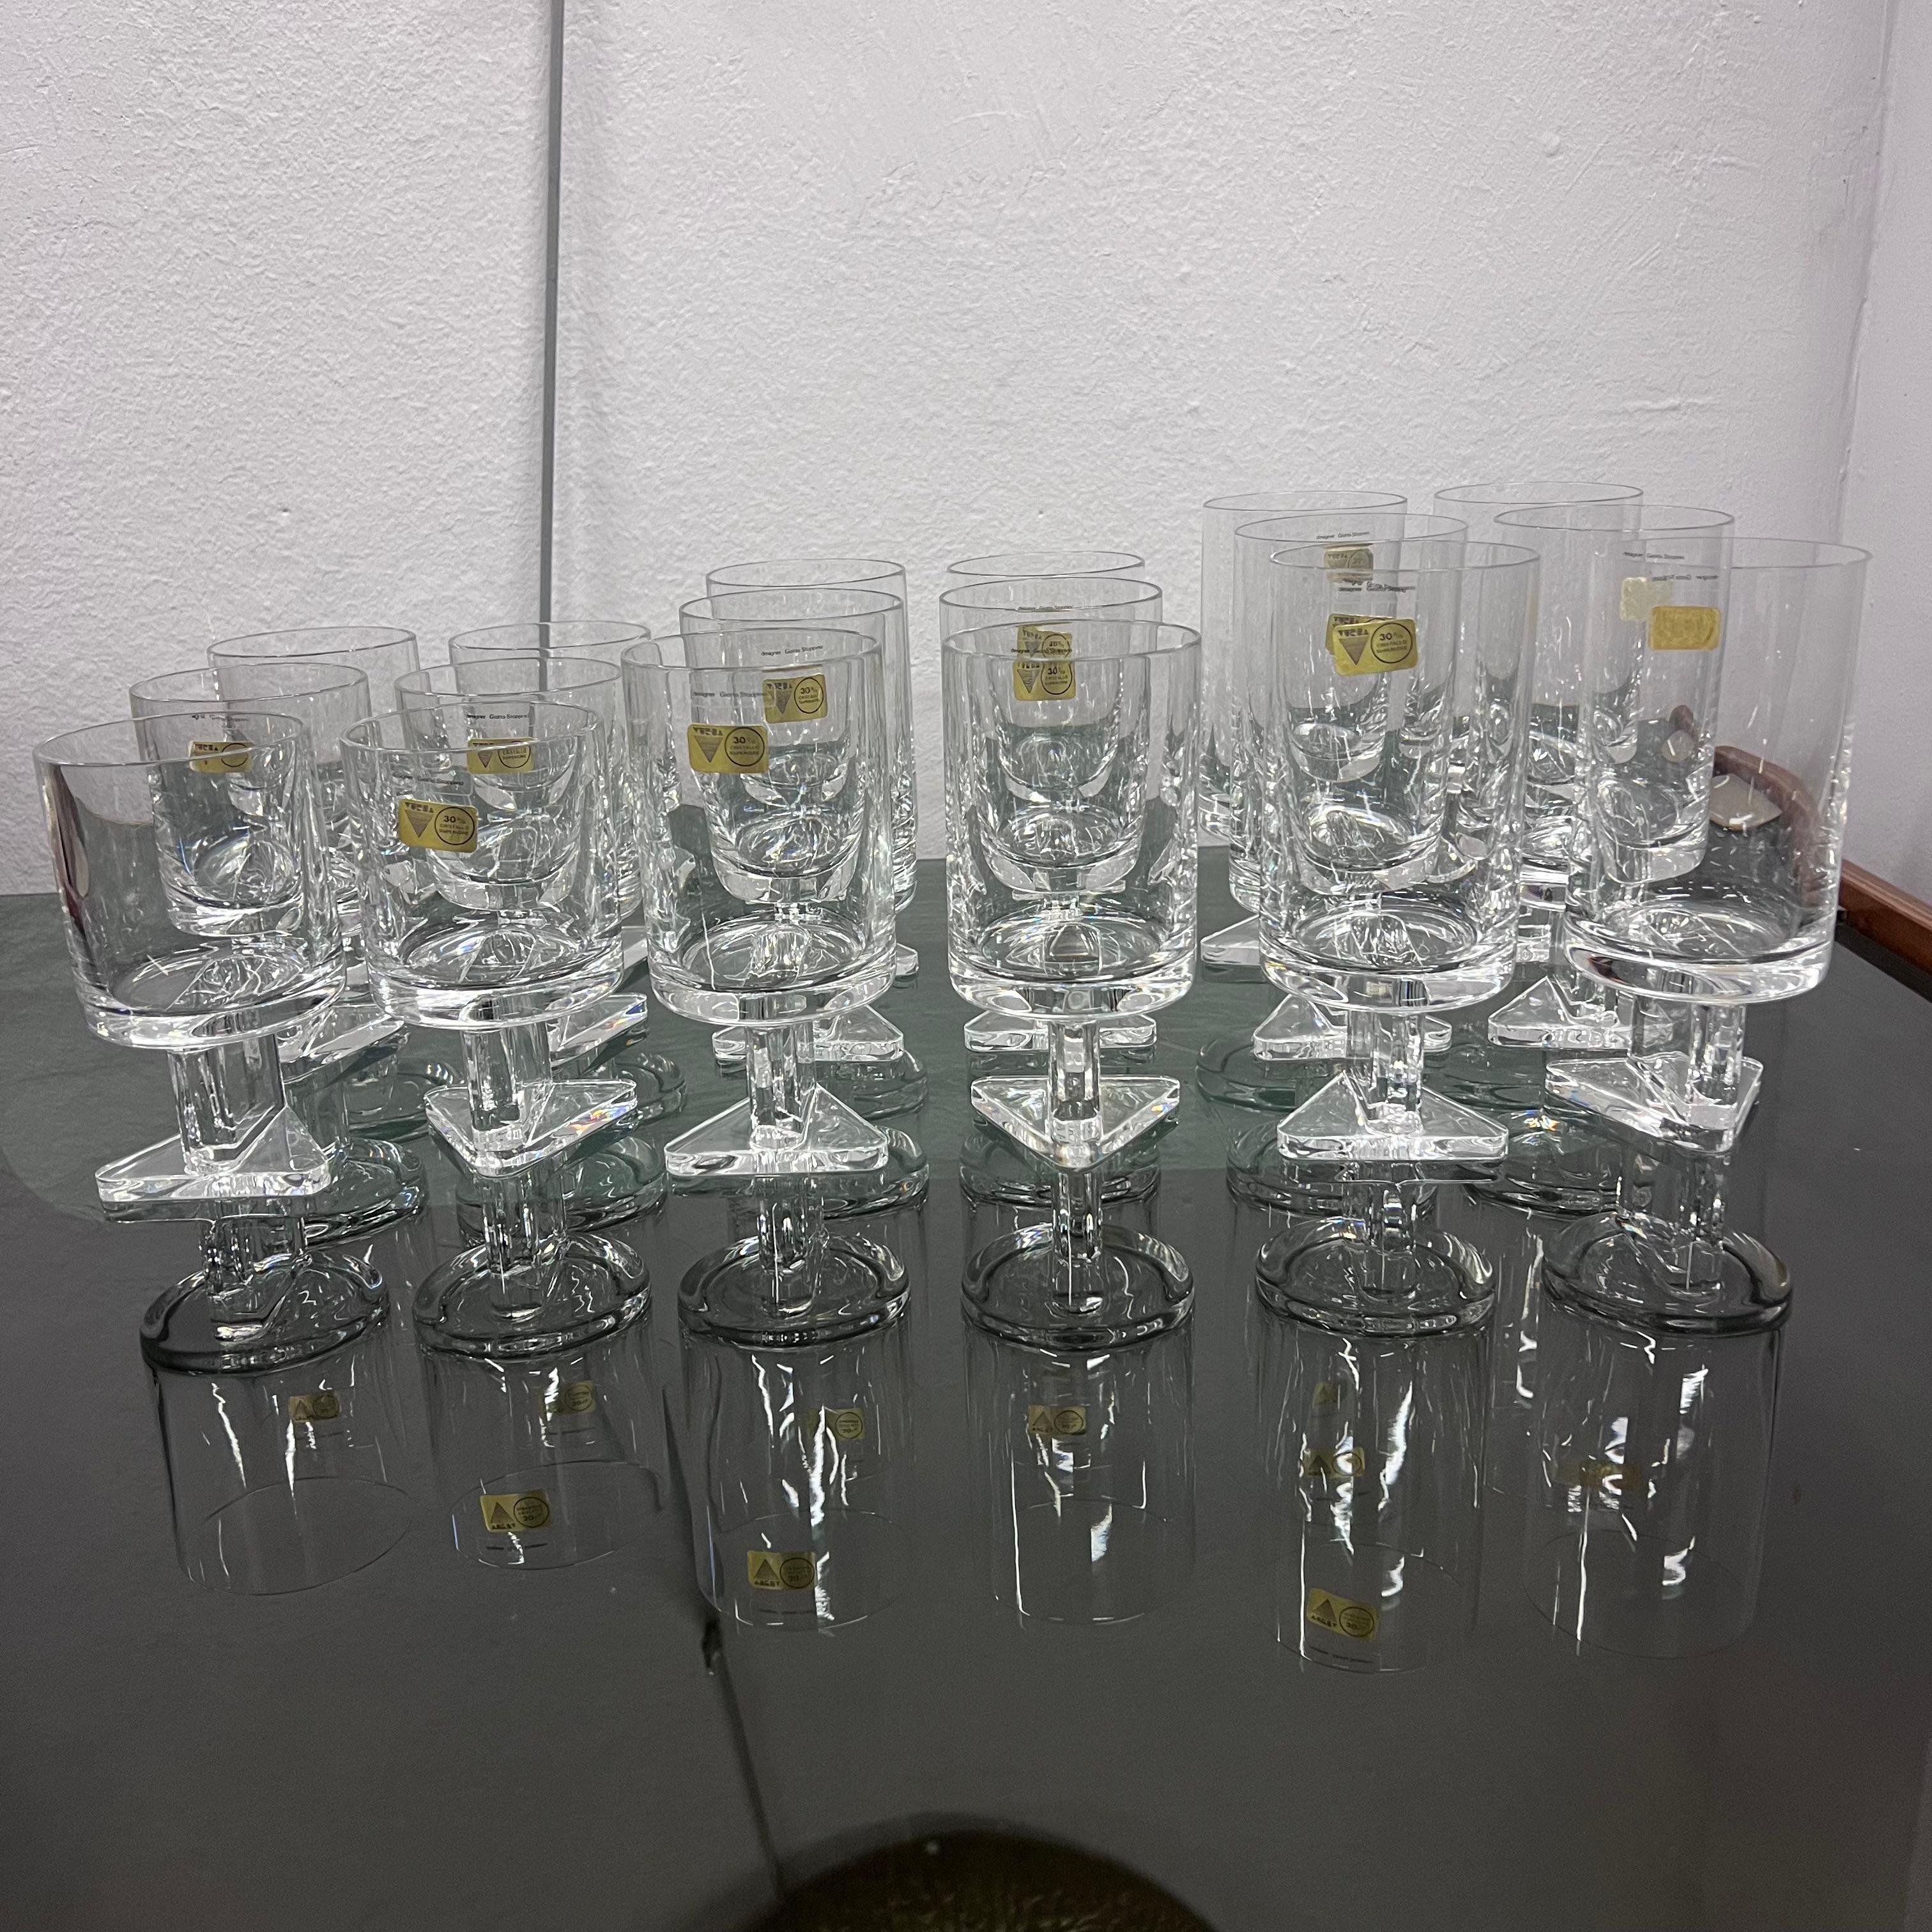 Original six-person glass service divided into: 6 water glasses, 6 white wine glasses, 6 red wine glasses, total of 18 pieces.
Designed by Giotto Stoppino, in an original form that harkens back to the Space Age period, they have a triangular base